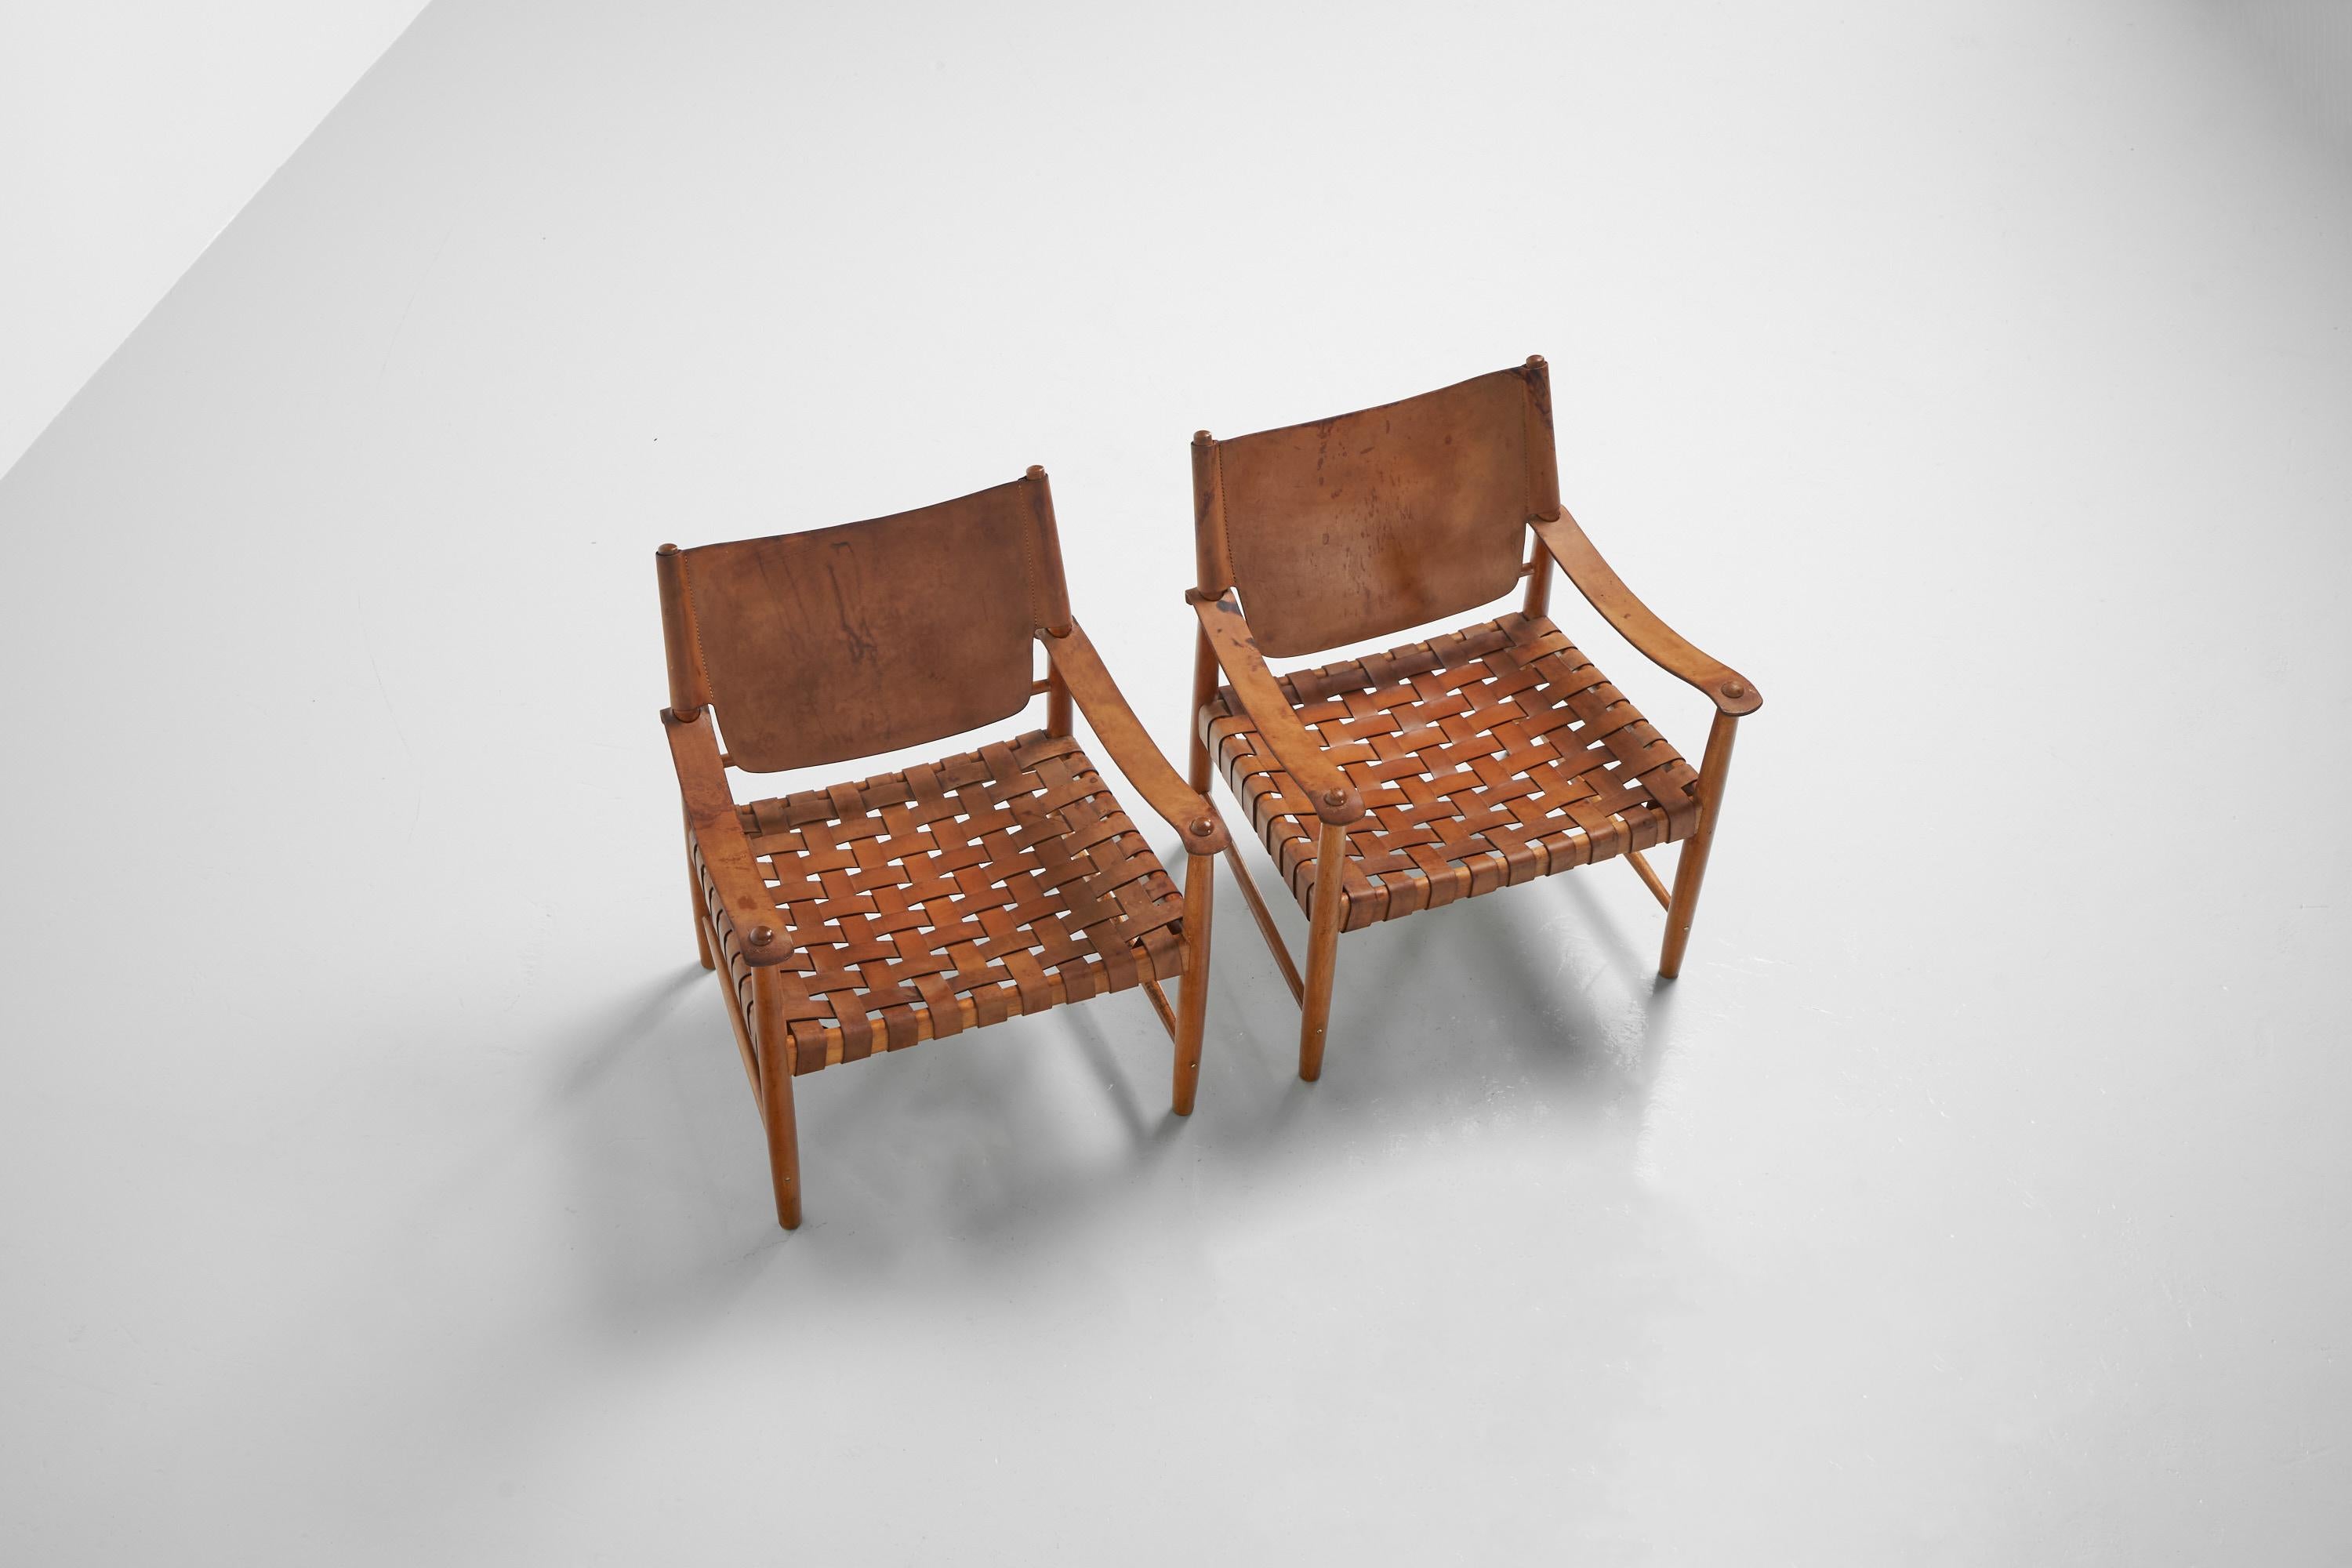 Striking pair of so called 'Safari' arm chairs made by unknown designer or manufacturer in Sweden, 1950s. The chairs have a solid oak wooden frame and the seats are made of beautiful patinated natural leather. The chairs are fully original and in